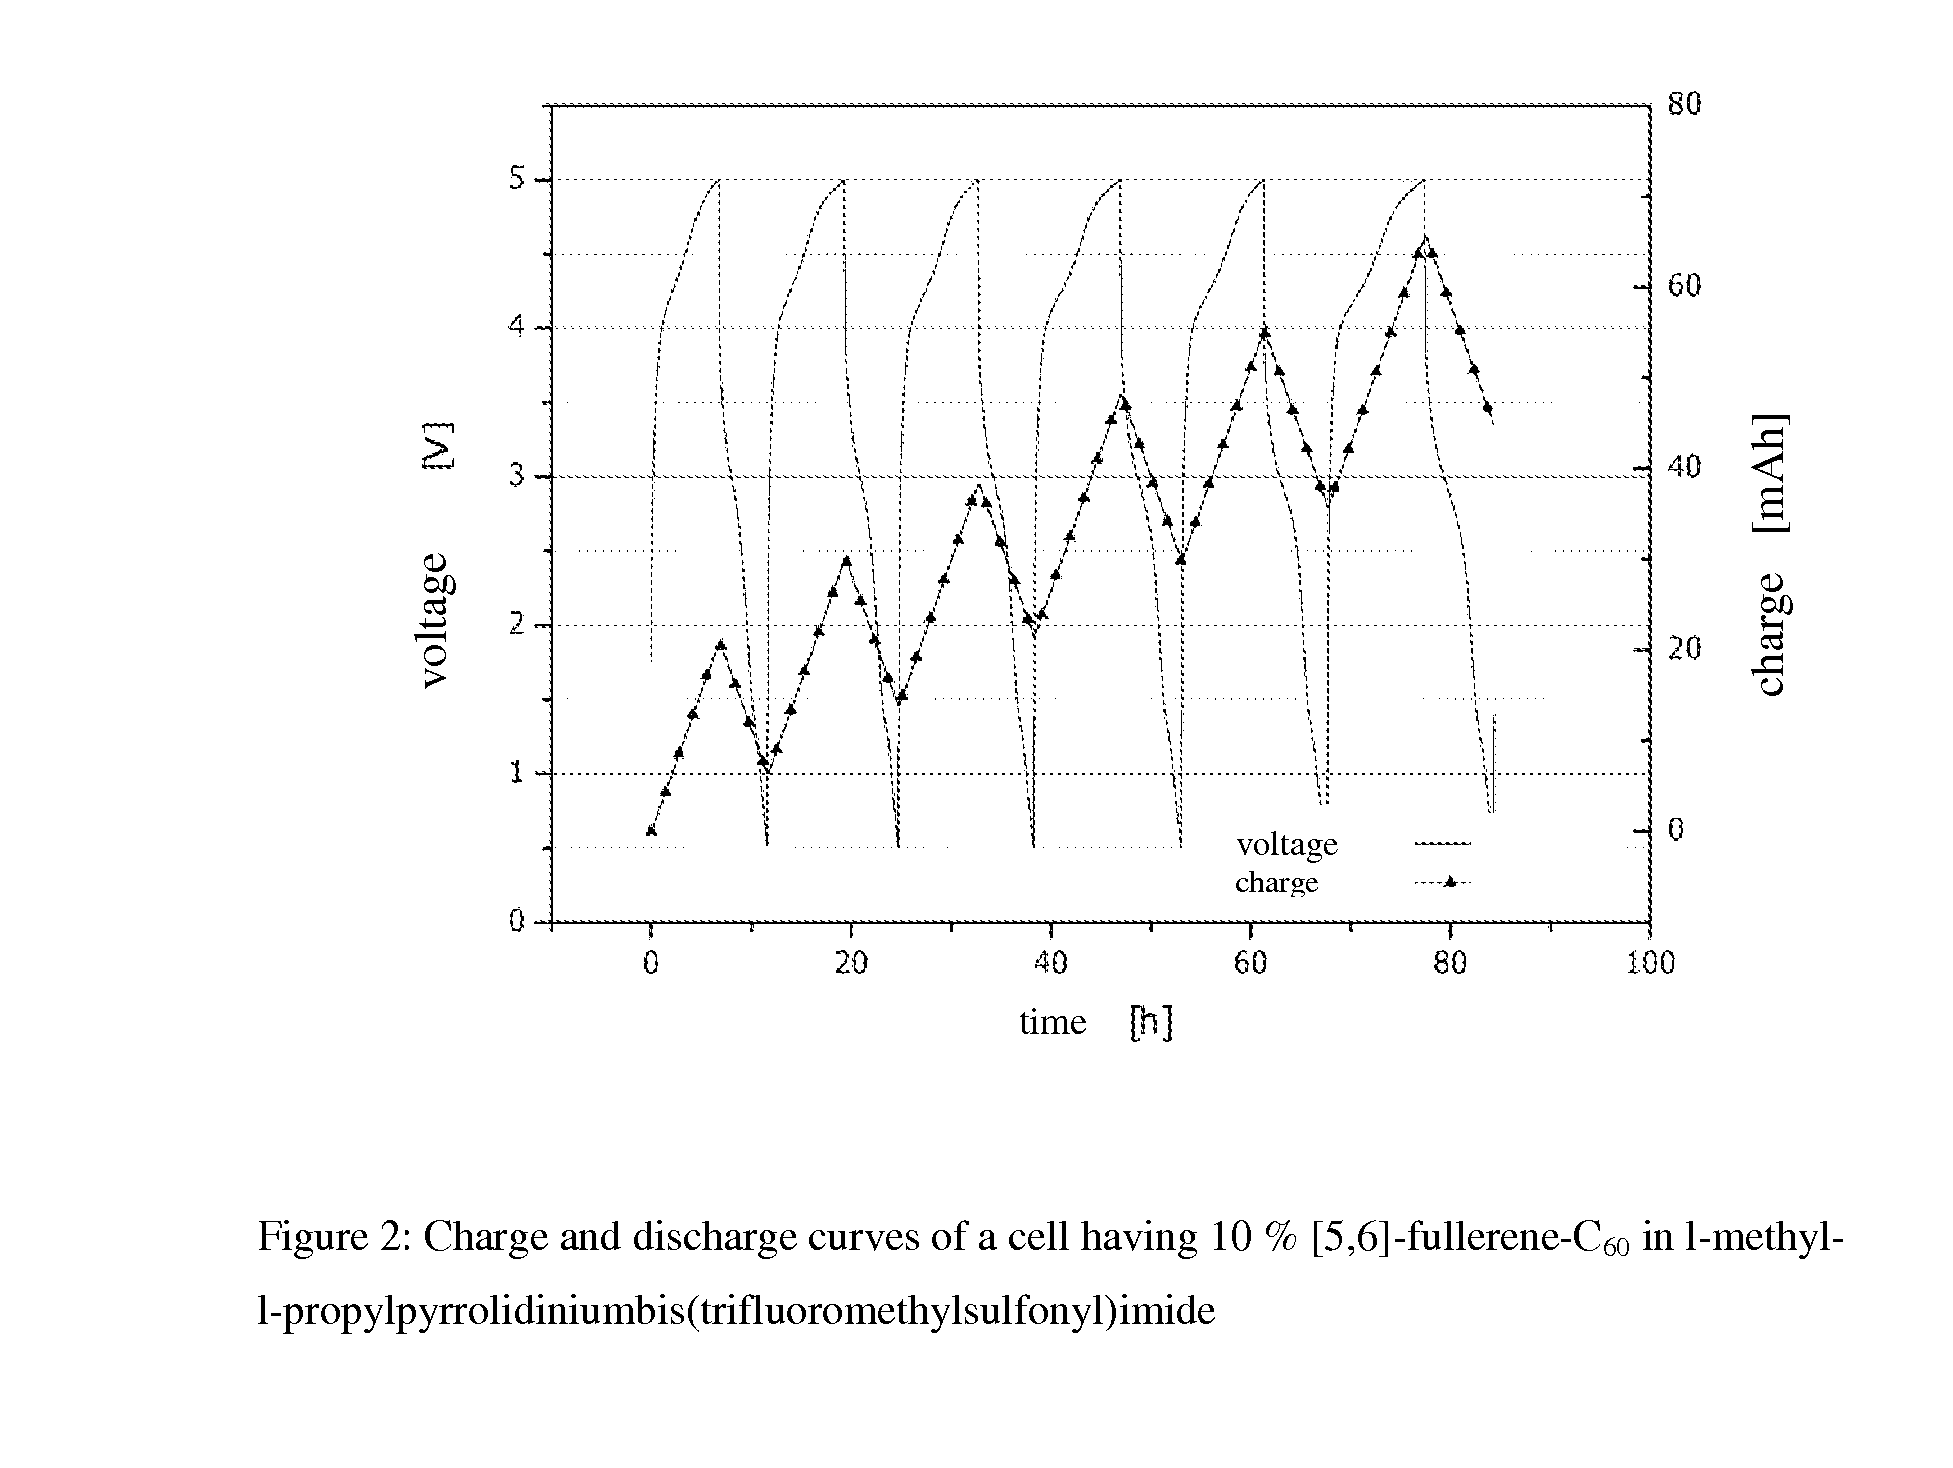 Electrochemical energy storage device or energy conversion device comprising a galvanic cell having electrochemical half-cells containing a suspension or fullerene and ionic liquid